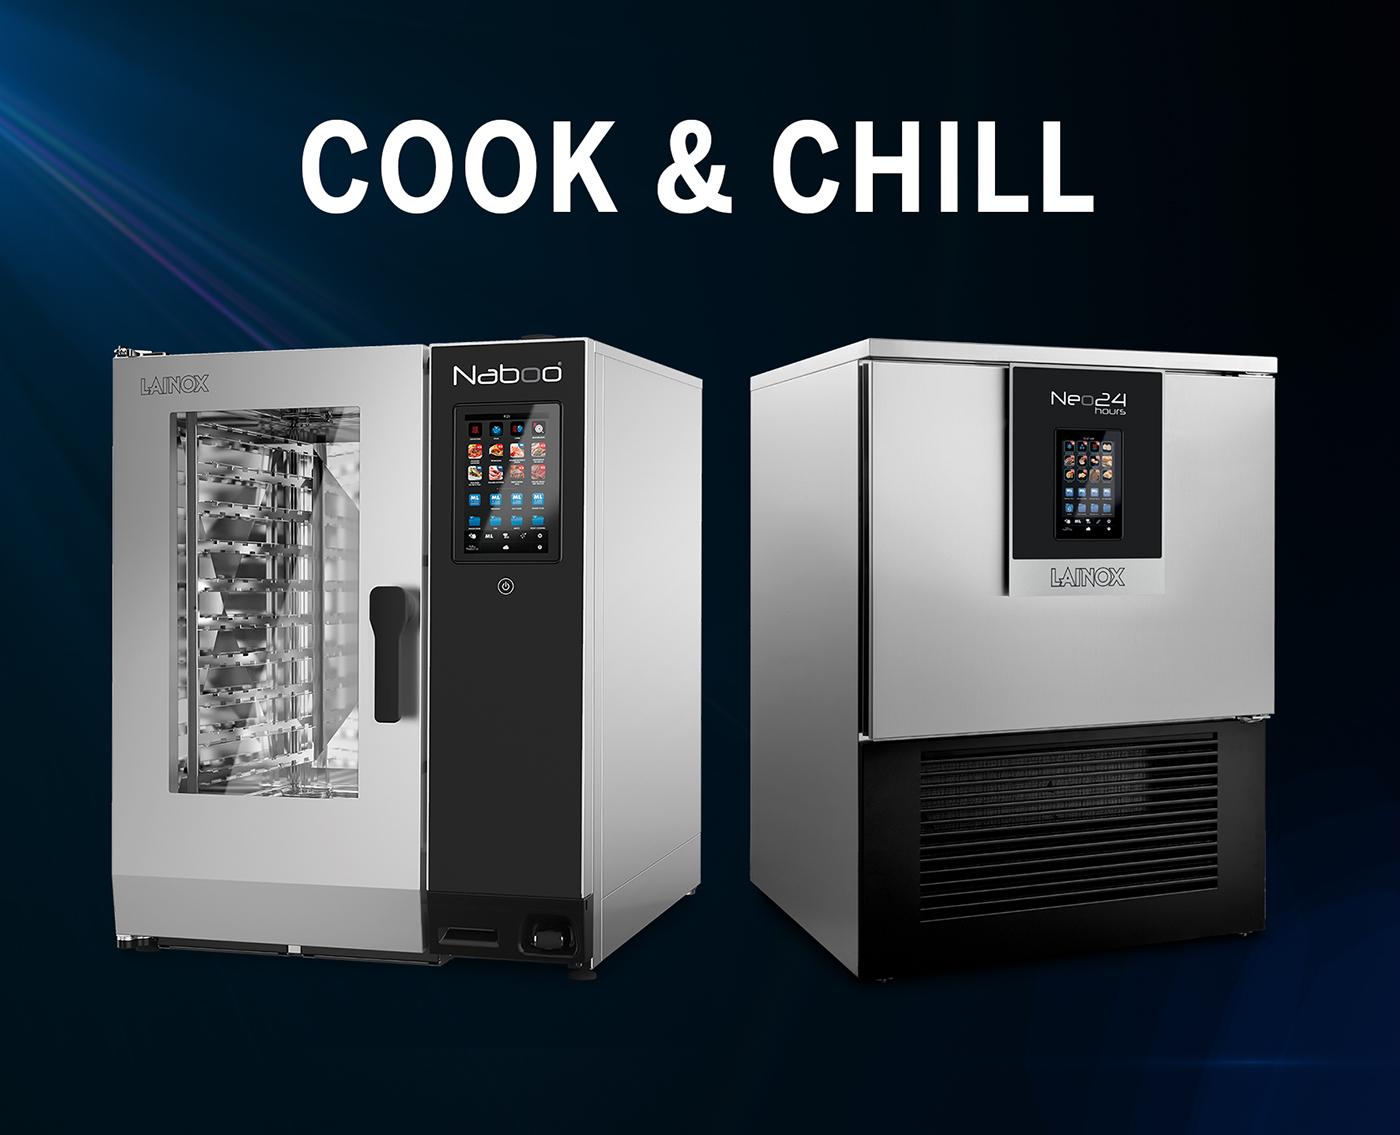 Efficiency and safety in the kitchen: all the advantages of the Cook and Chill system